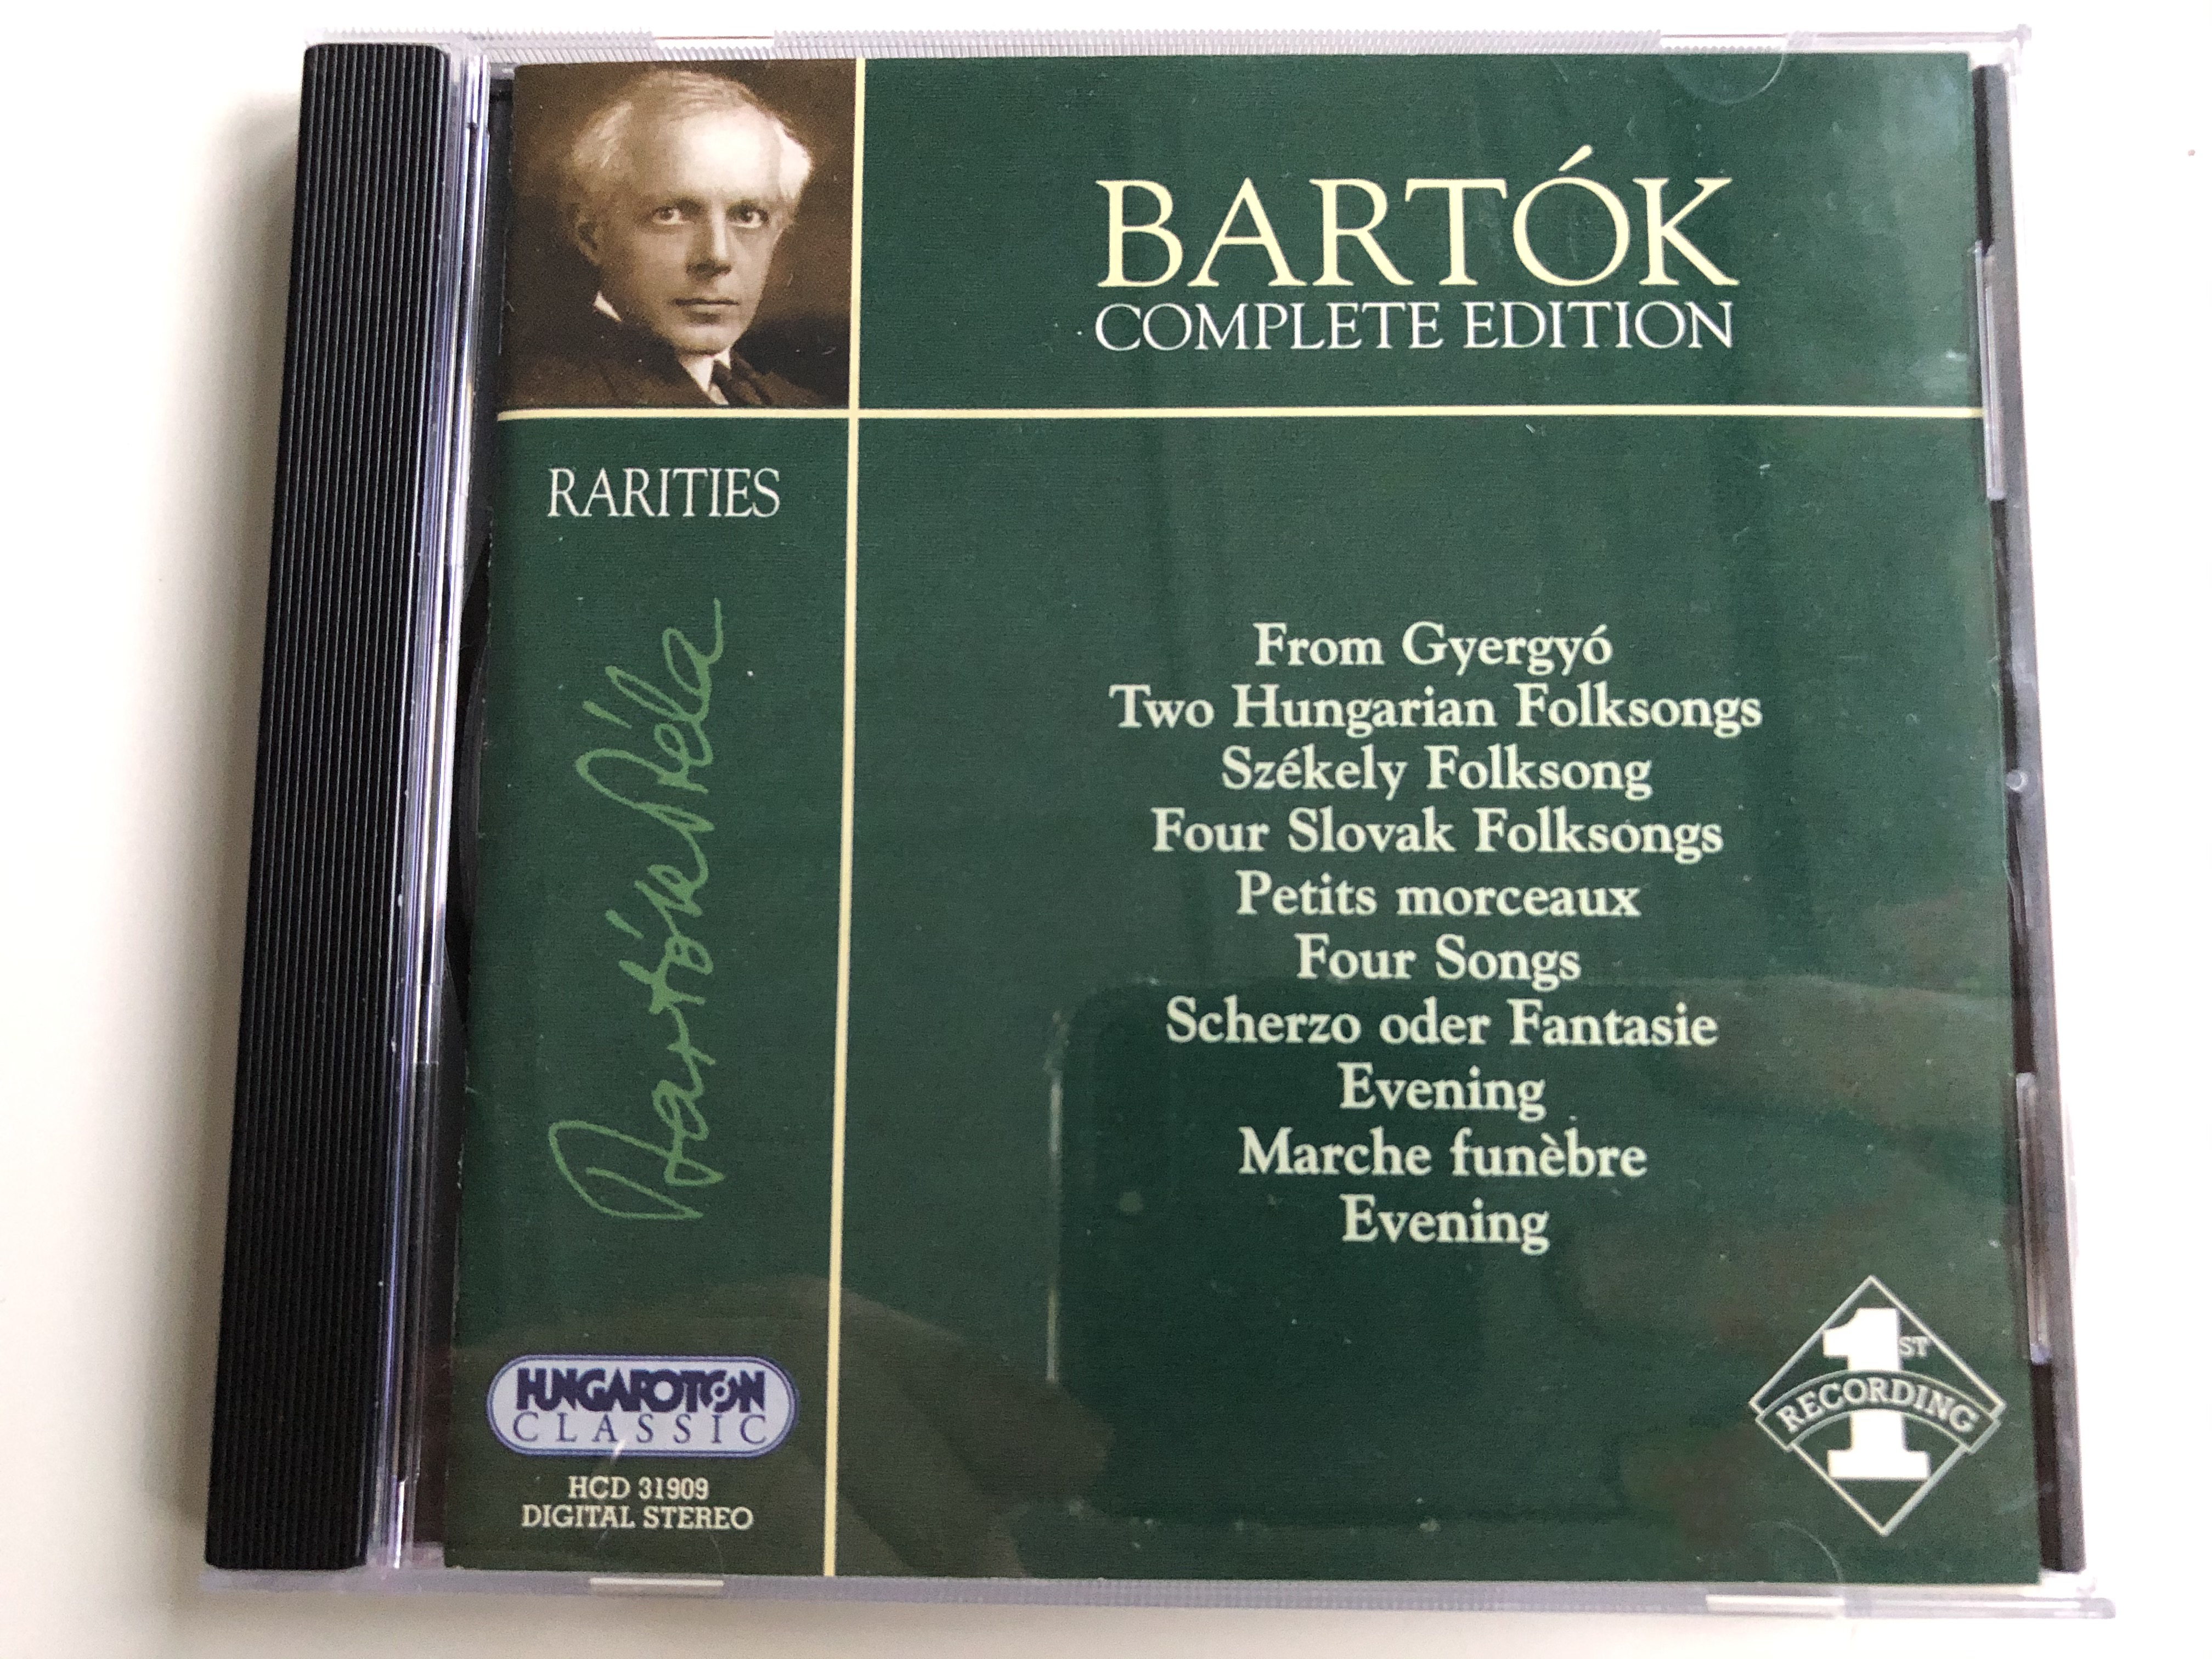 bartok-complete-edition-rapities-from-gyergyo-two-hungarian-folksongs-szeleky-folksong-four-slovak-folksongs-petits-morceaux-four-songs-scherzo-oder-fantasie-hungaroton-classic-audio-cd-2-1-.jpg